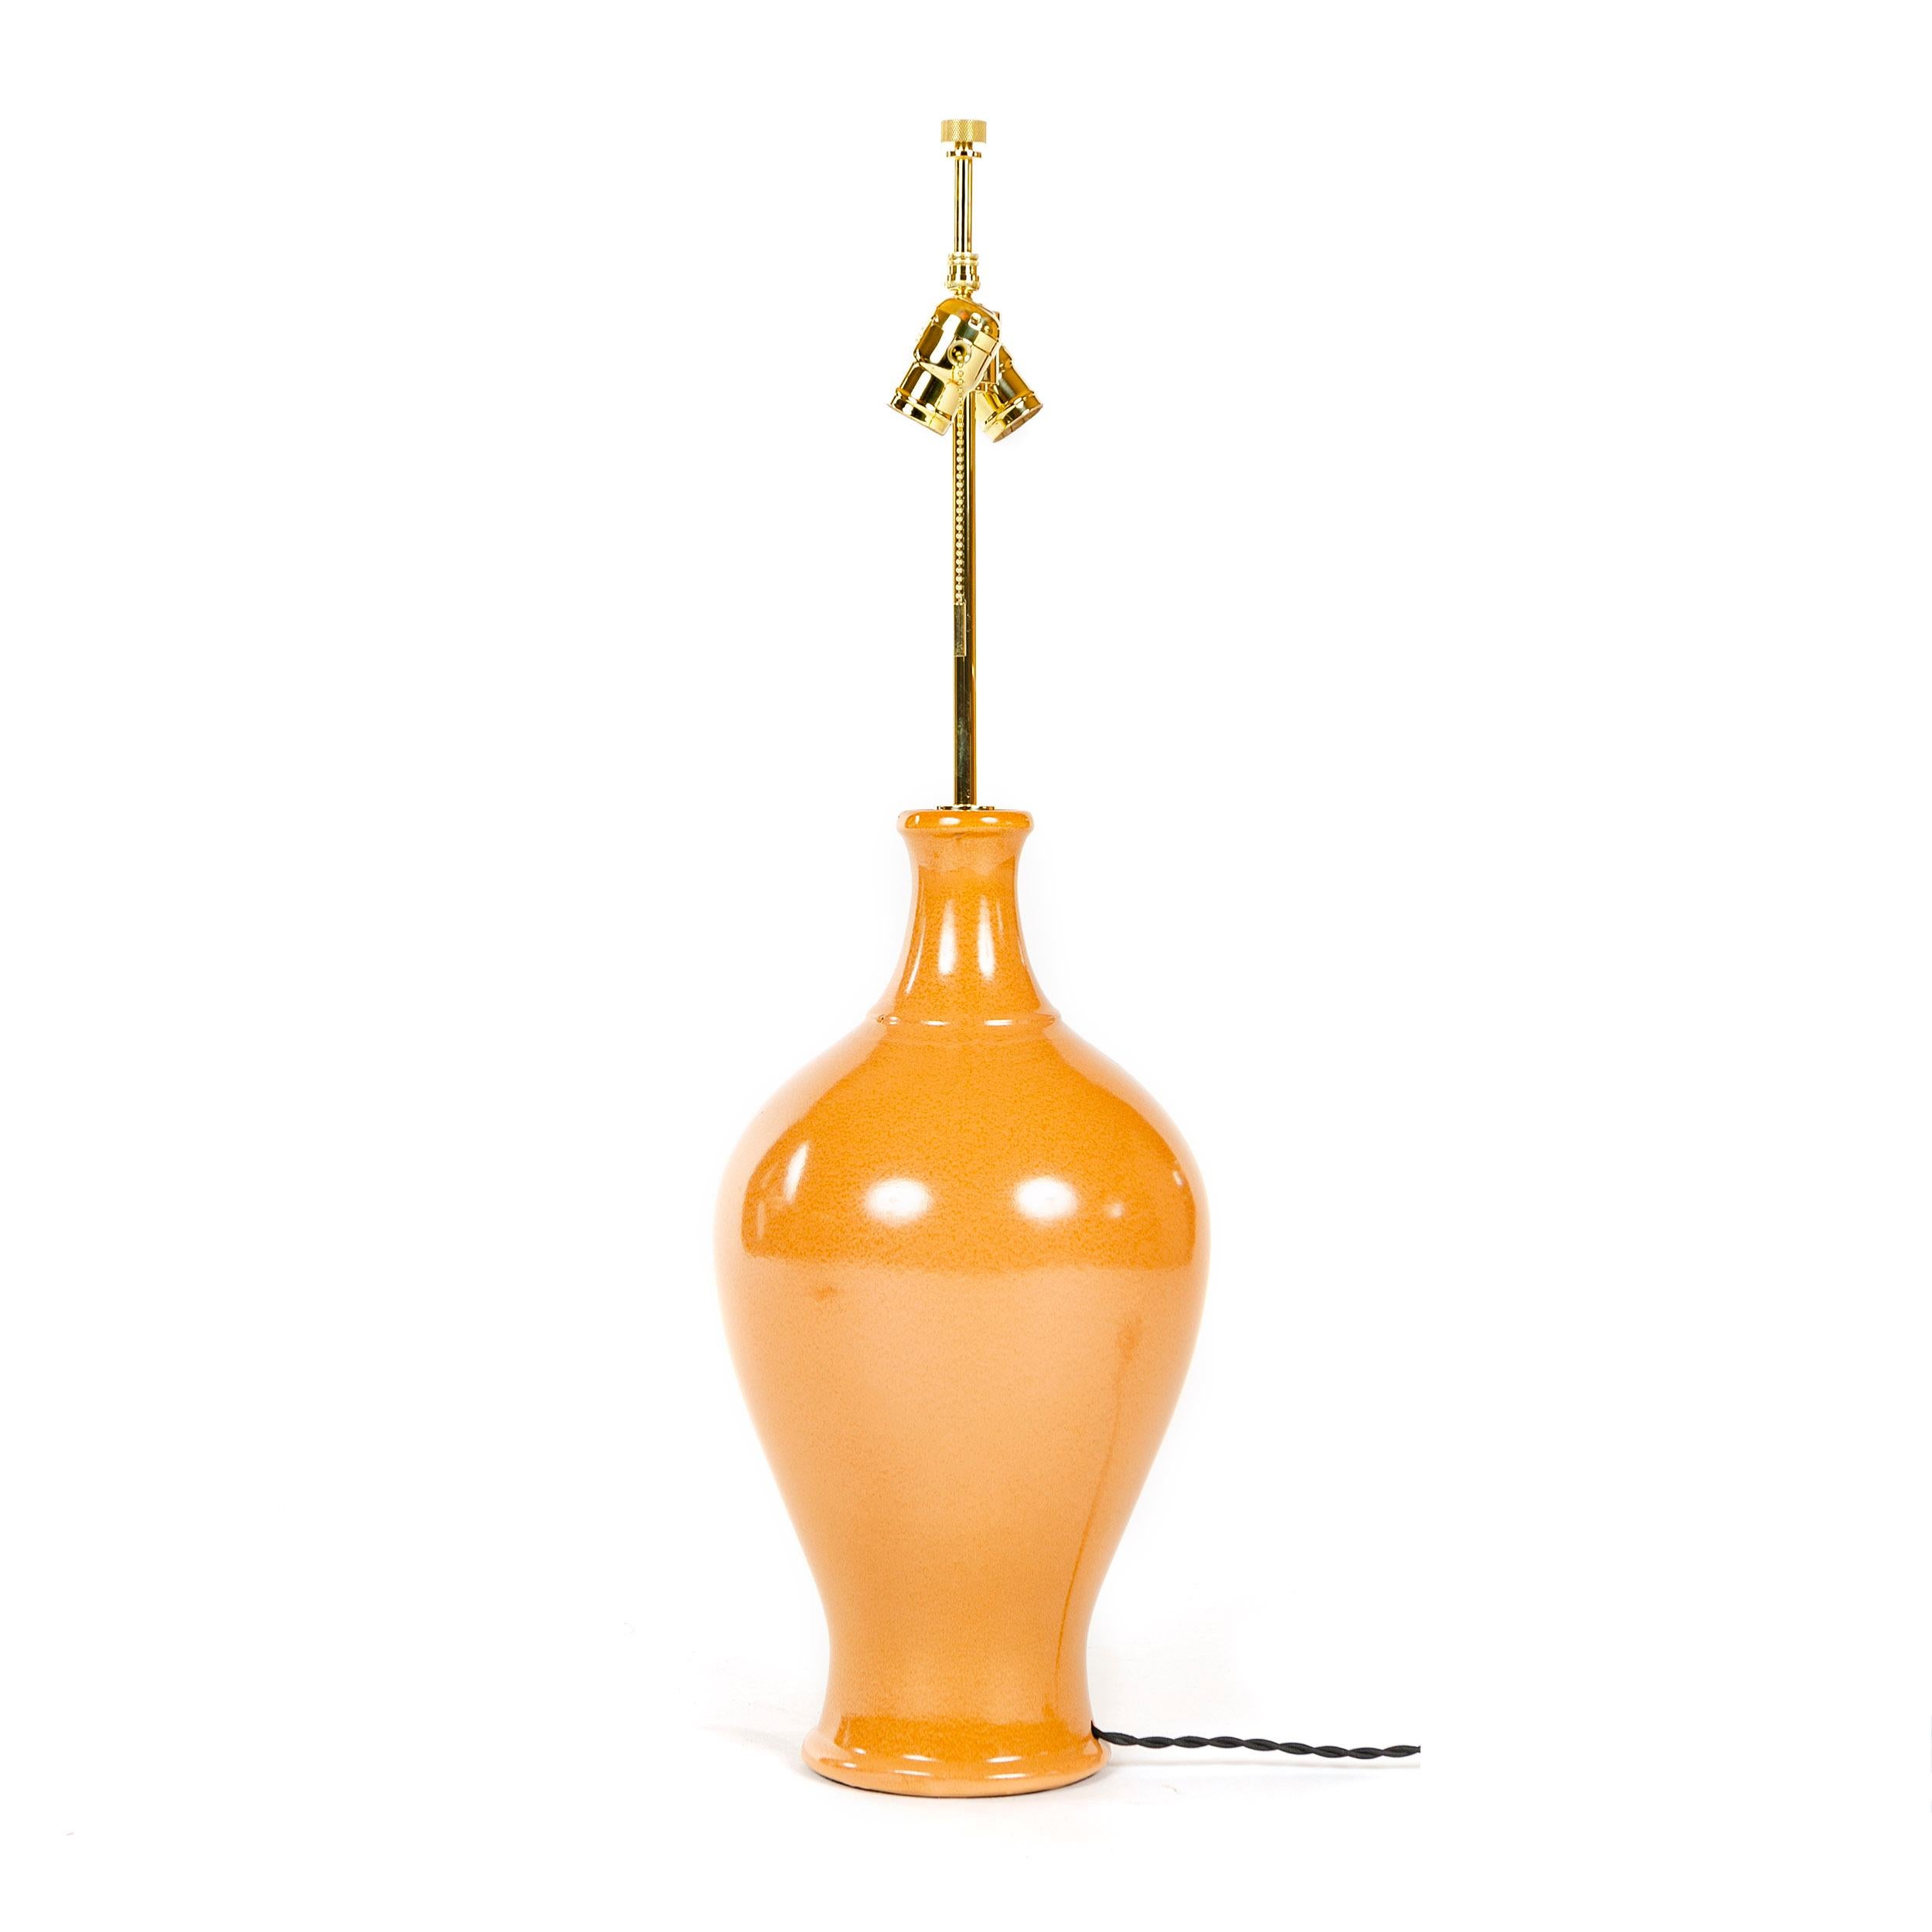 A classic, bulbous vase form rendered as a large curvaceous high glaze ceramic table lamp. Sold with an installed solid brass custom light fitting consisting of a circular cover plate for the rod hole, vertical rod, double socket ball cluster each